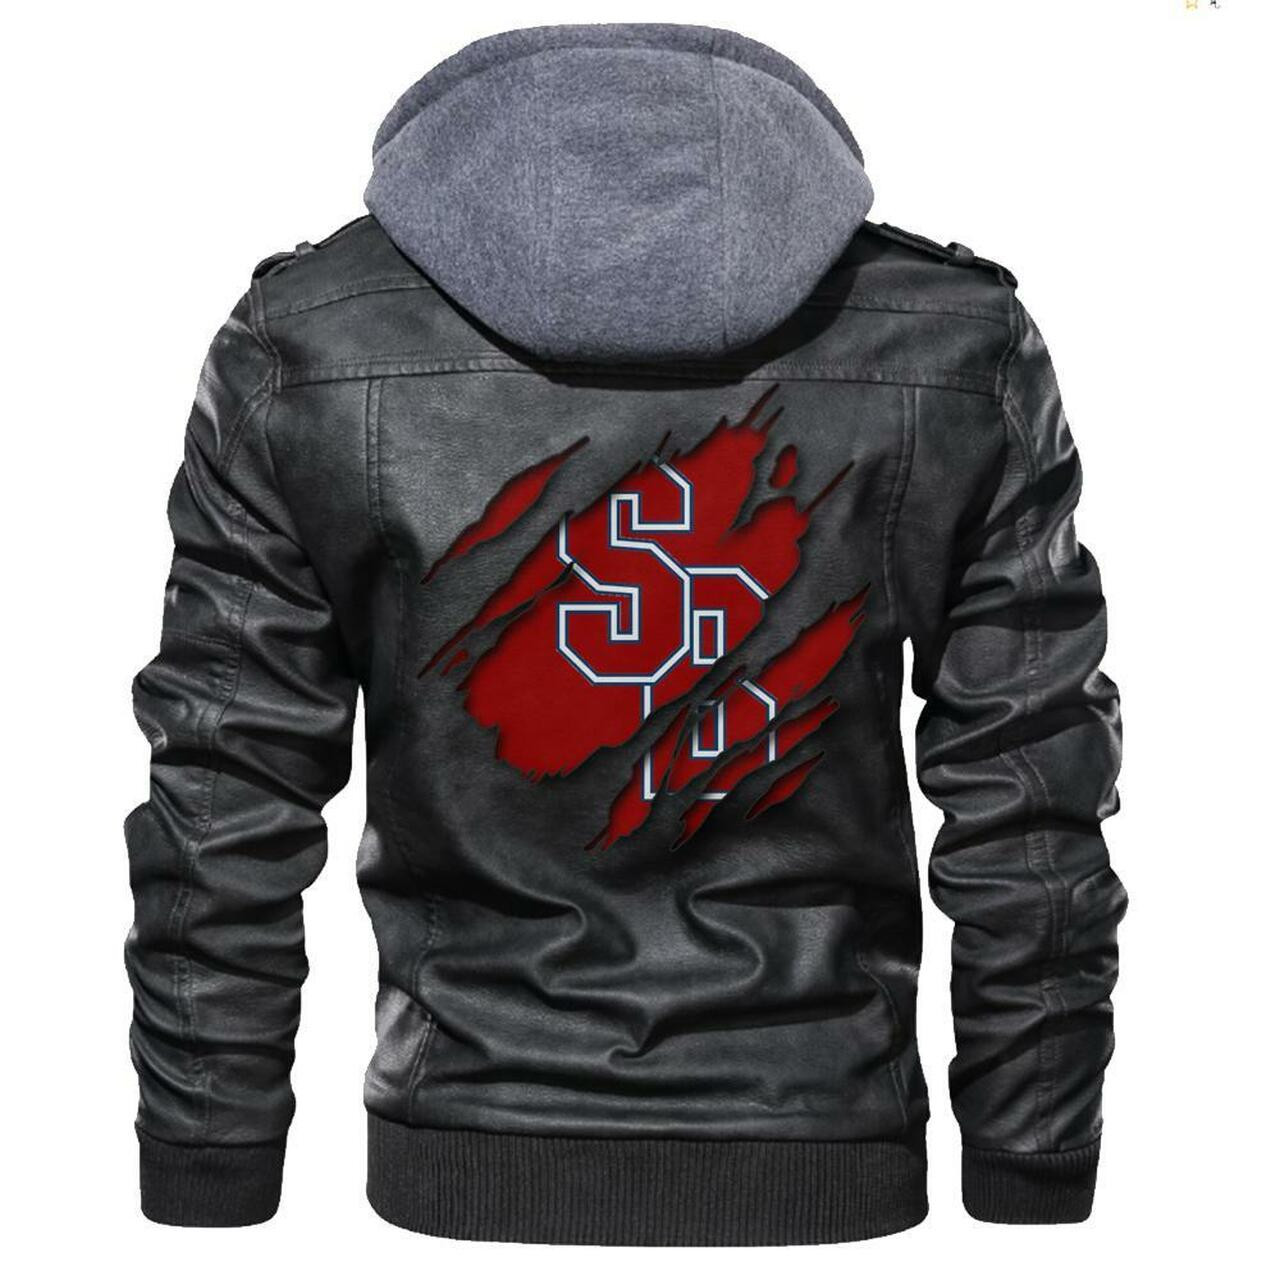 These Leather Jacket are popular options for Winter 393